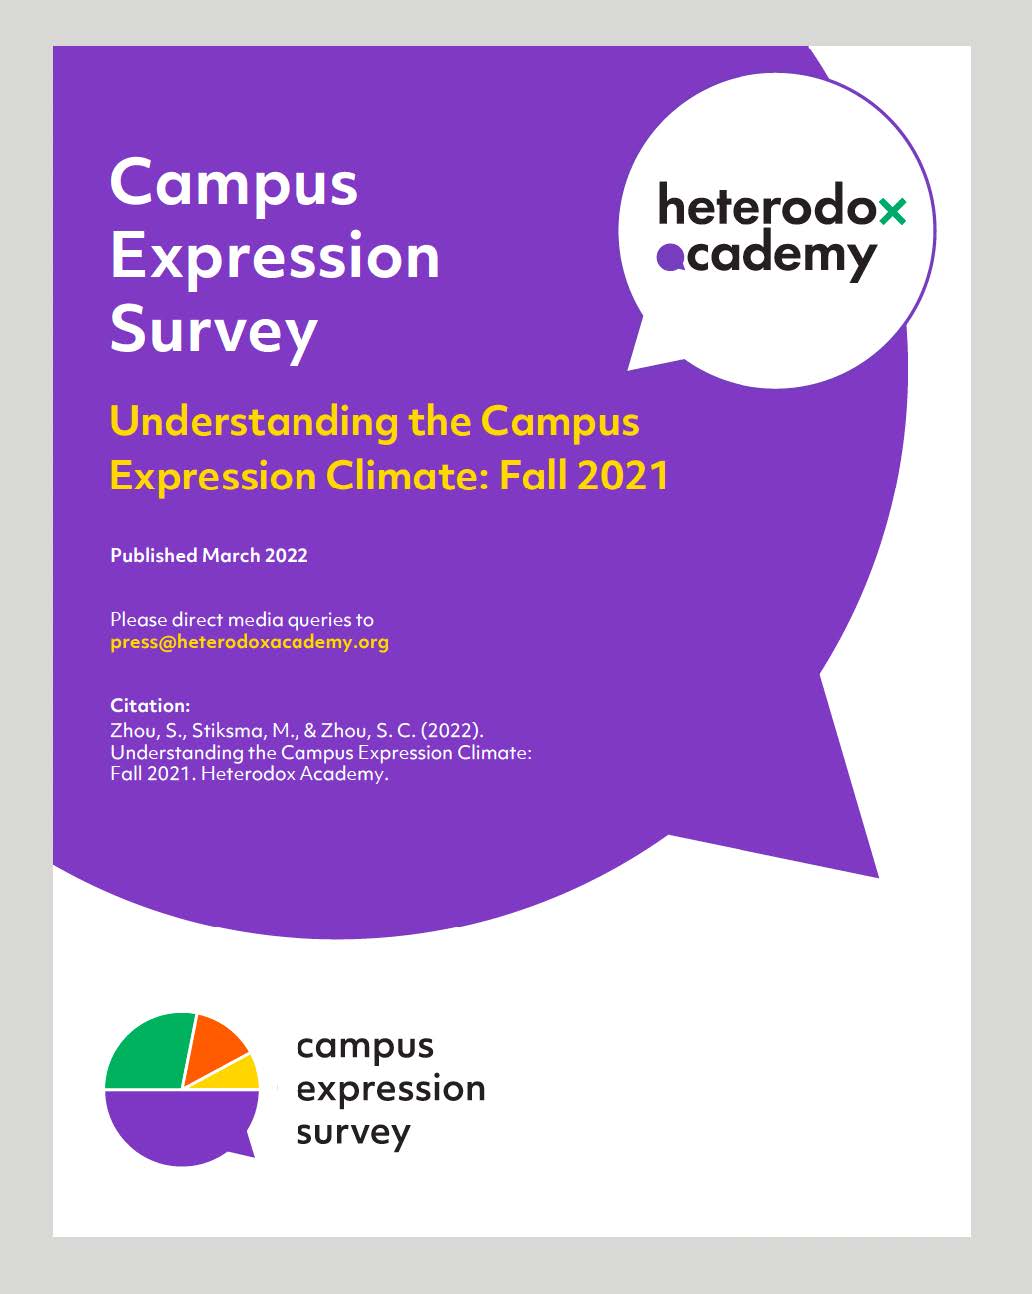 Campus Expression Survey Understanding the Campus Expression Climate: Fall 2021